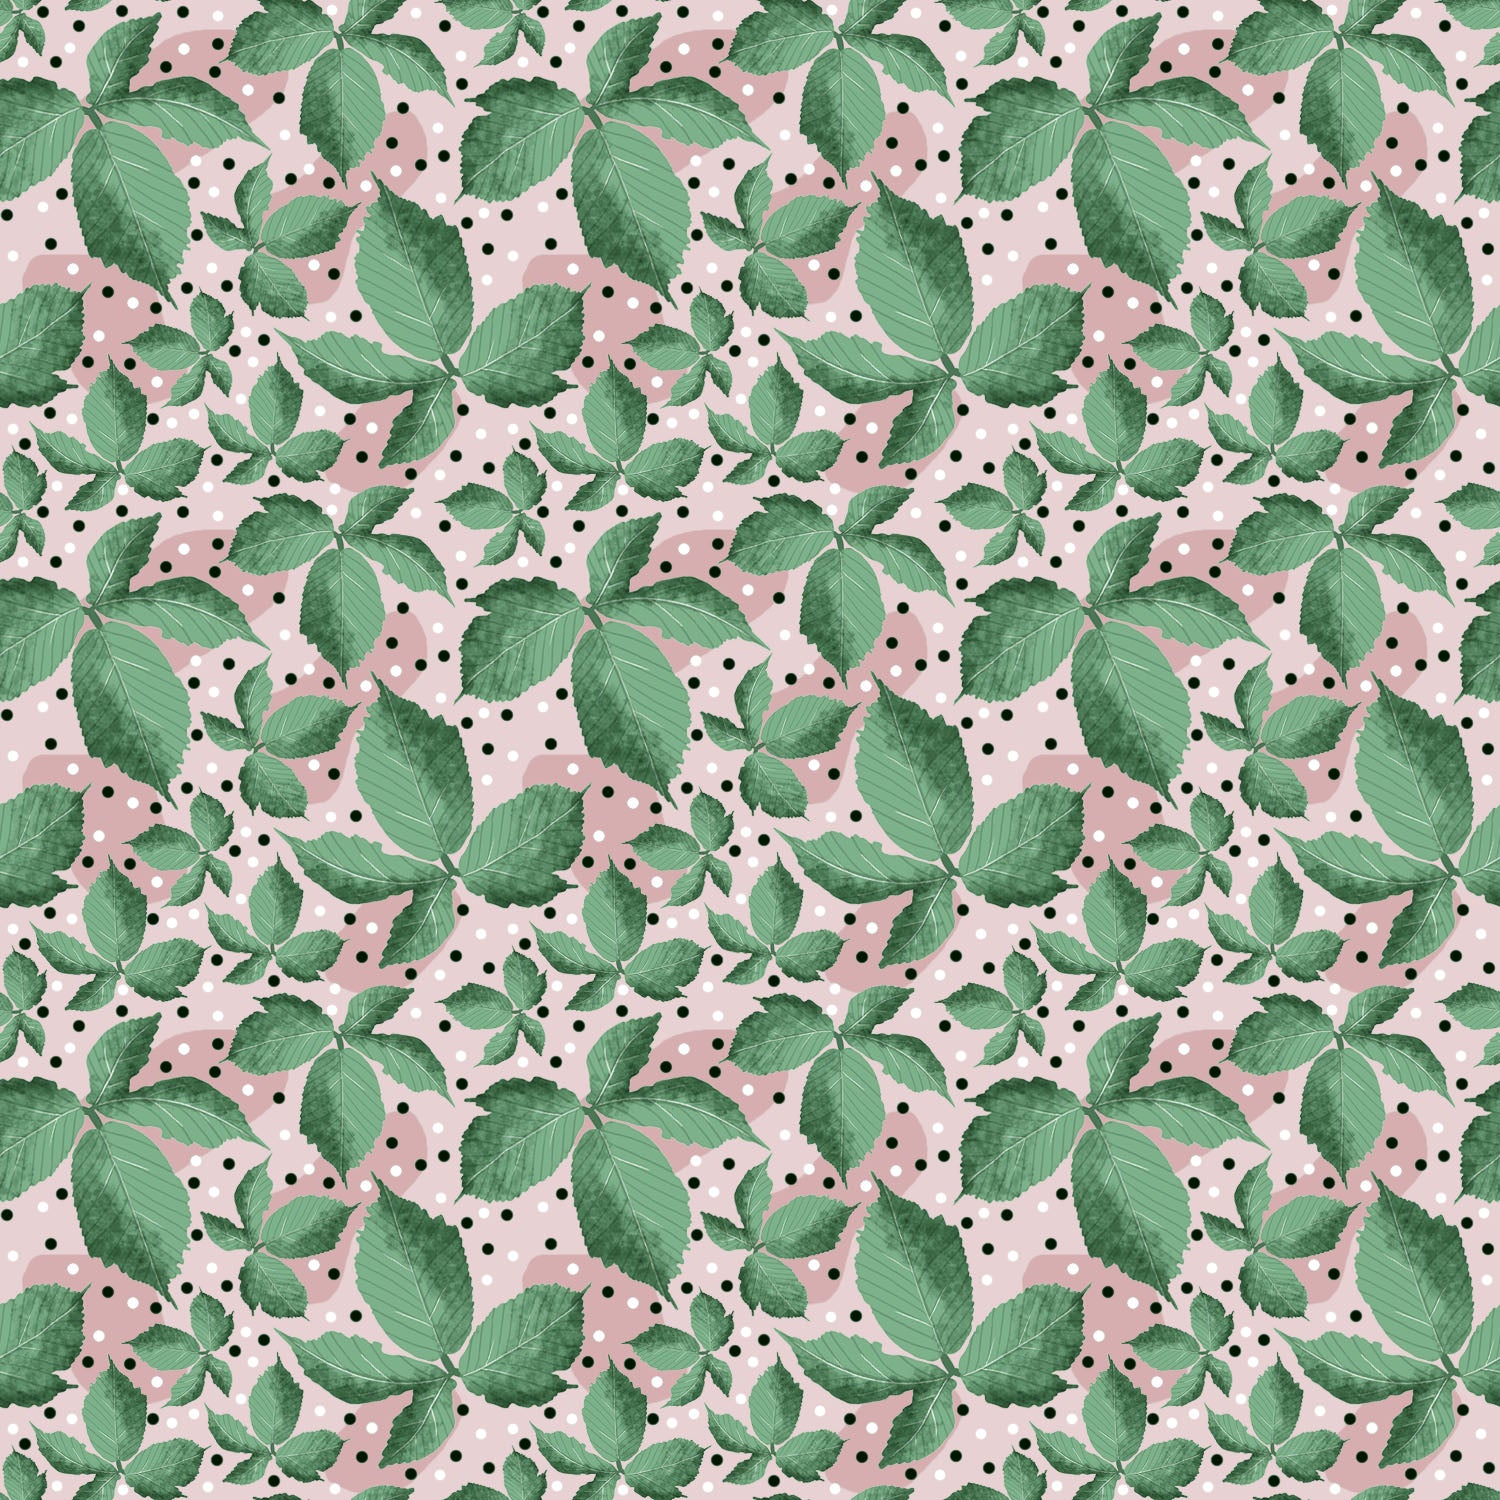 green leafy surface pattern design on pink